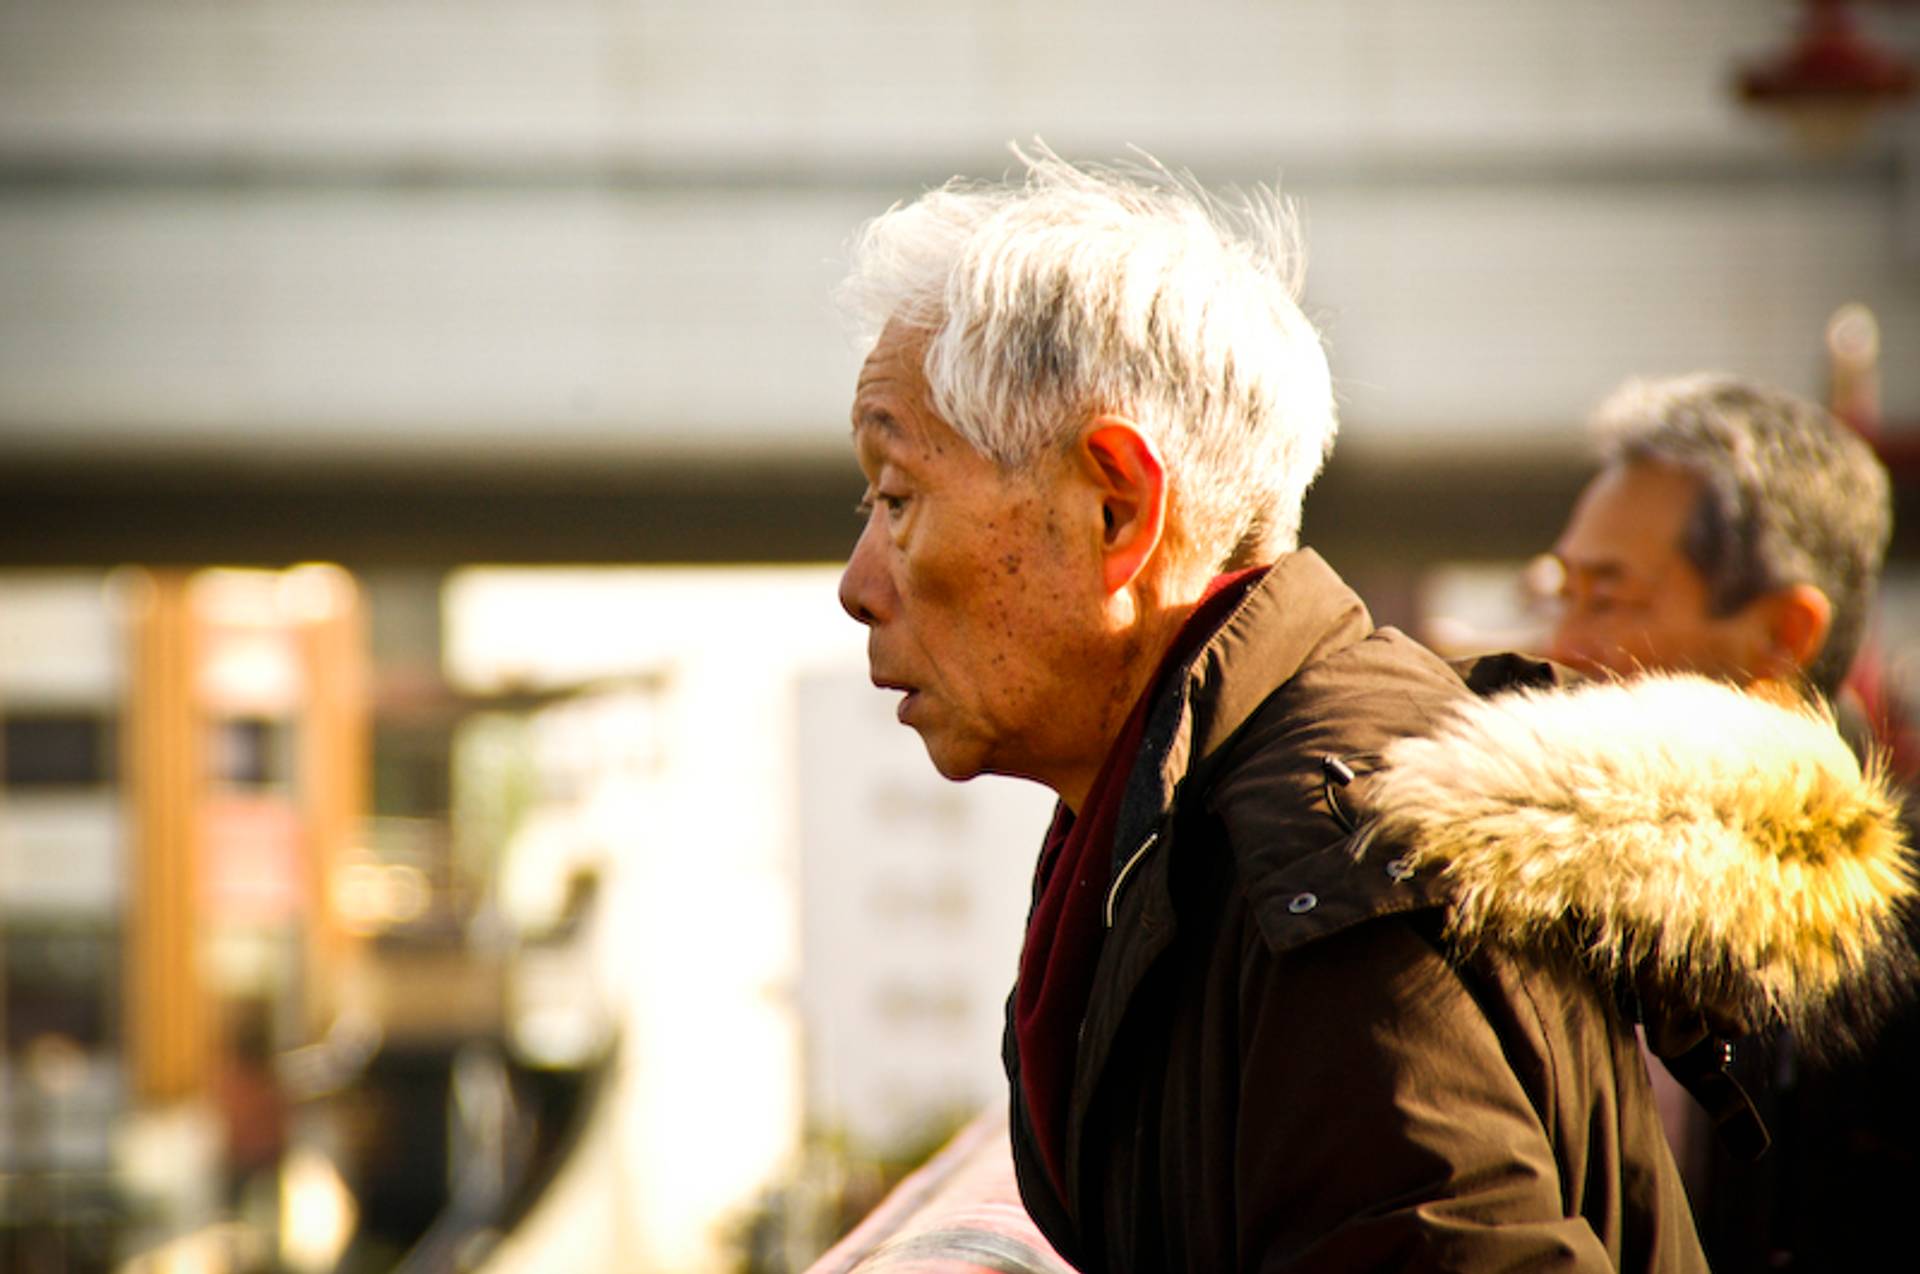 Japan has a silver-haired workforce